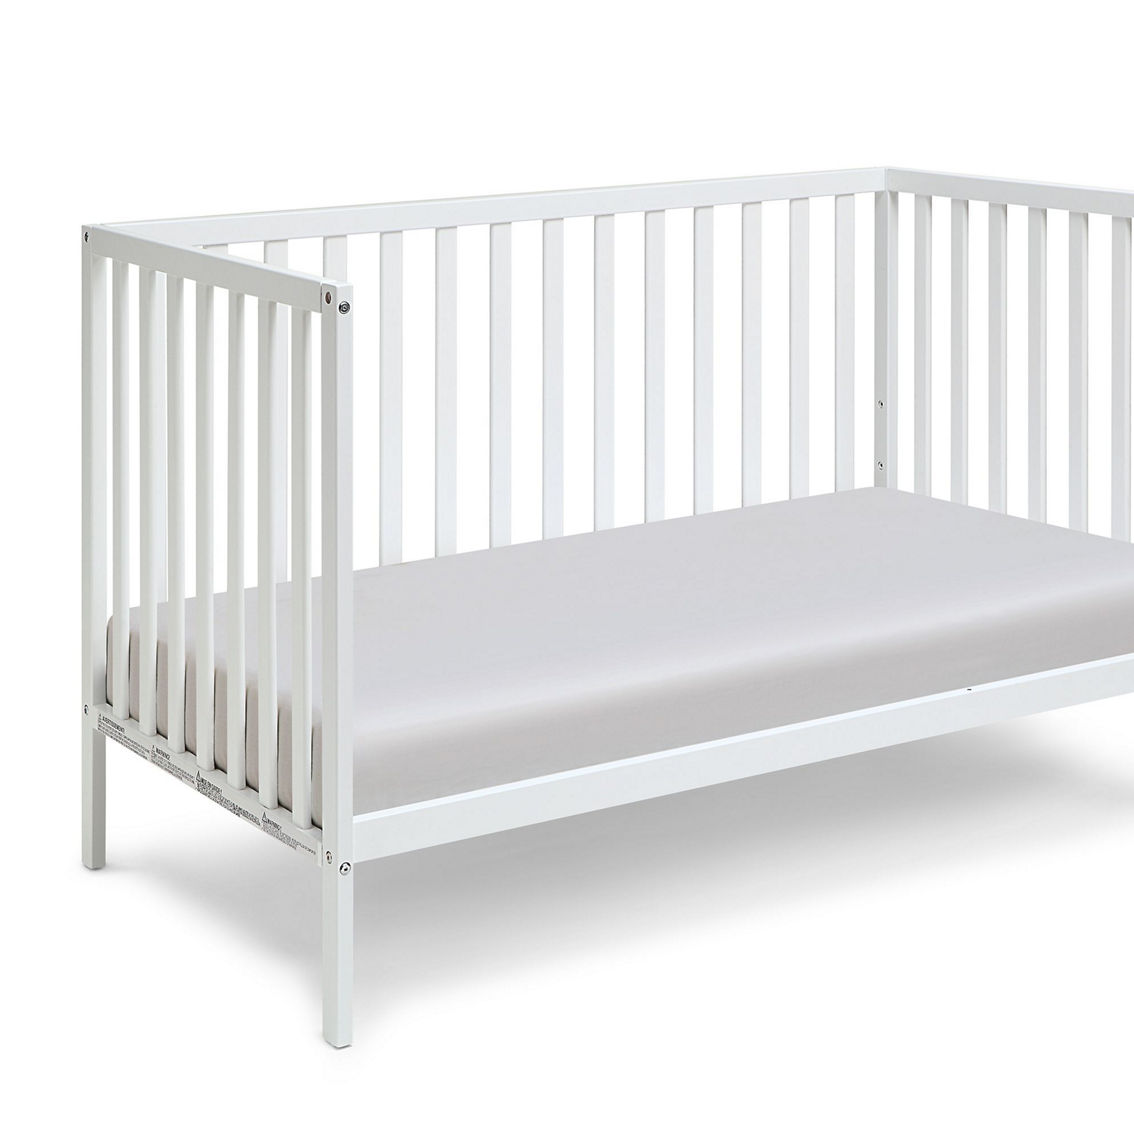 Suite Bebe Palmer 3-in-1 Convertible Island Crib White - Image 5 of 5